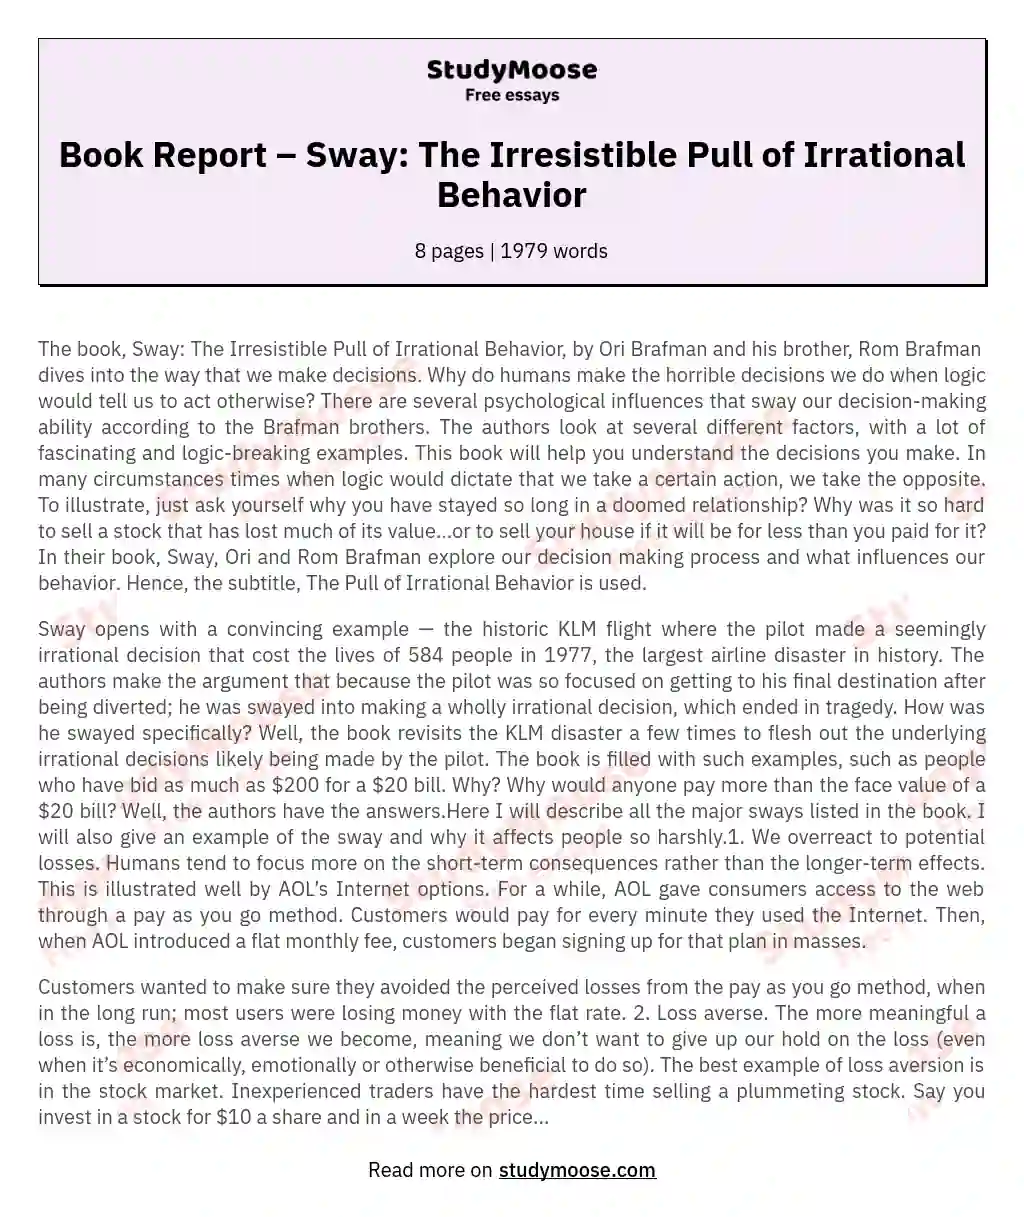 Book Report – Sway: The Irresistible Pull of Irrational Behavior